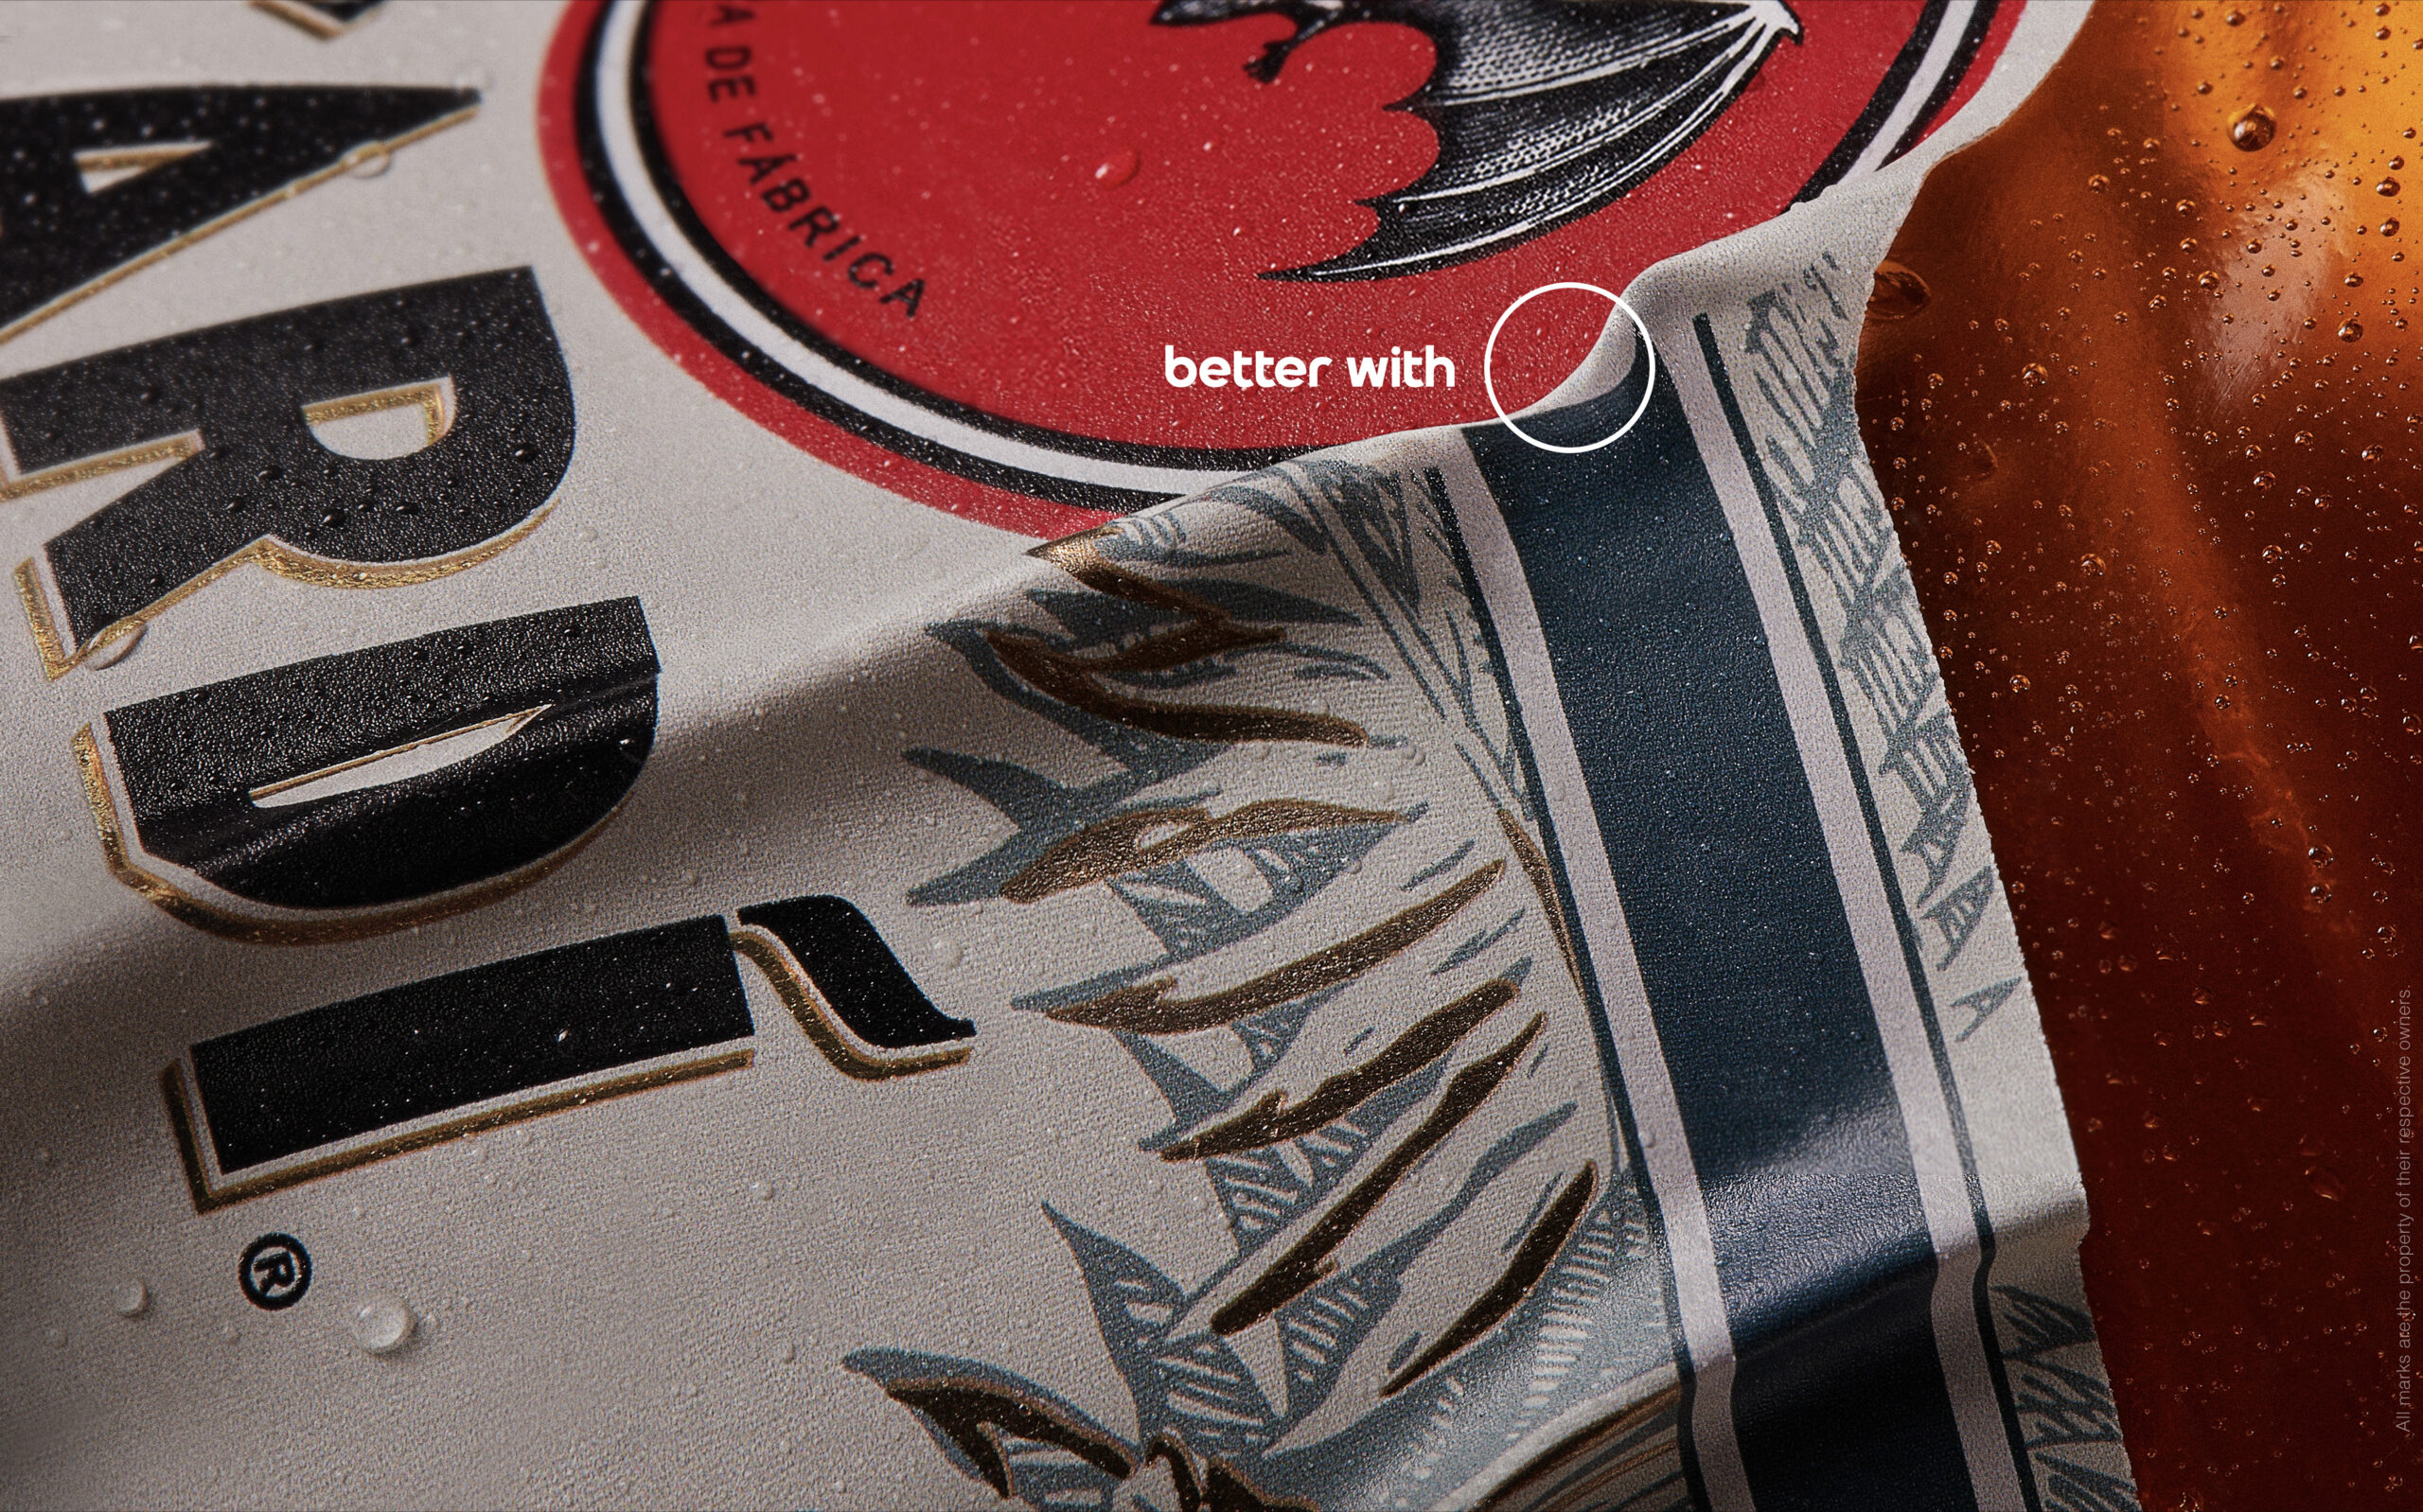 Rum and Pepsi campaign hero image showing close-up of label with logo